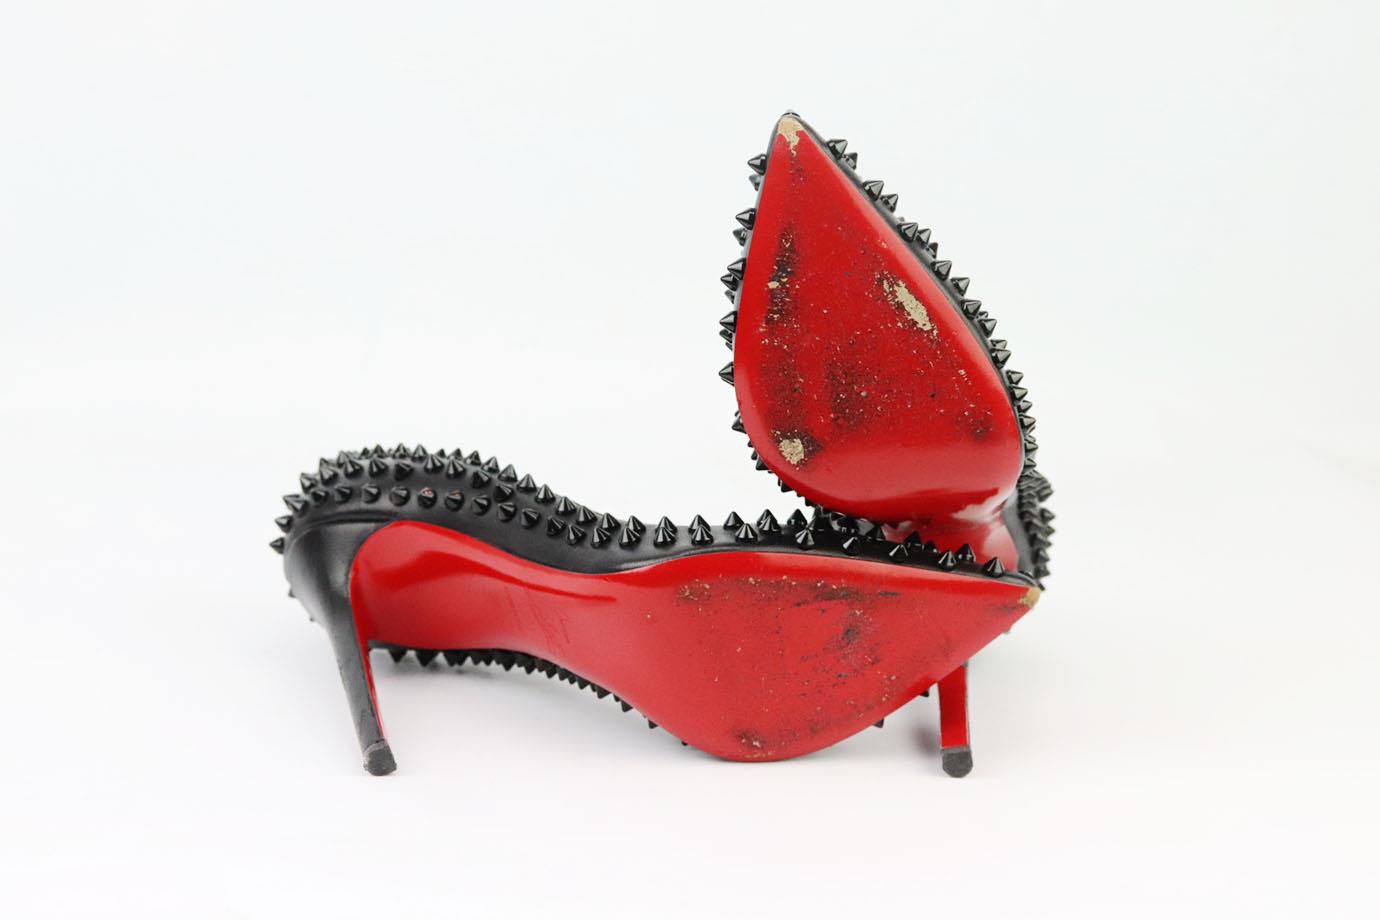 CHRISTIAN LOUBOUTIN So Me 100 spiked leather sandals | NET-A-PORTER